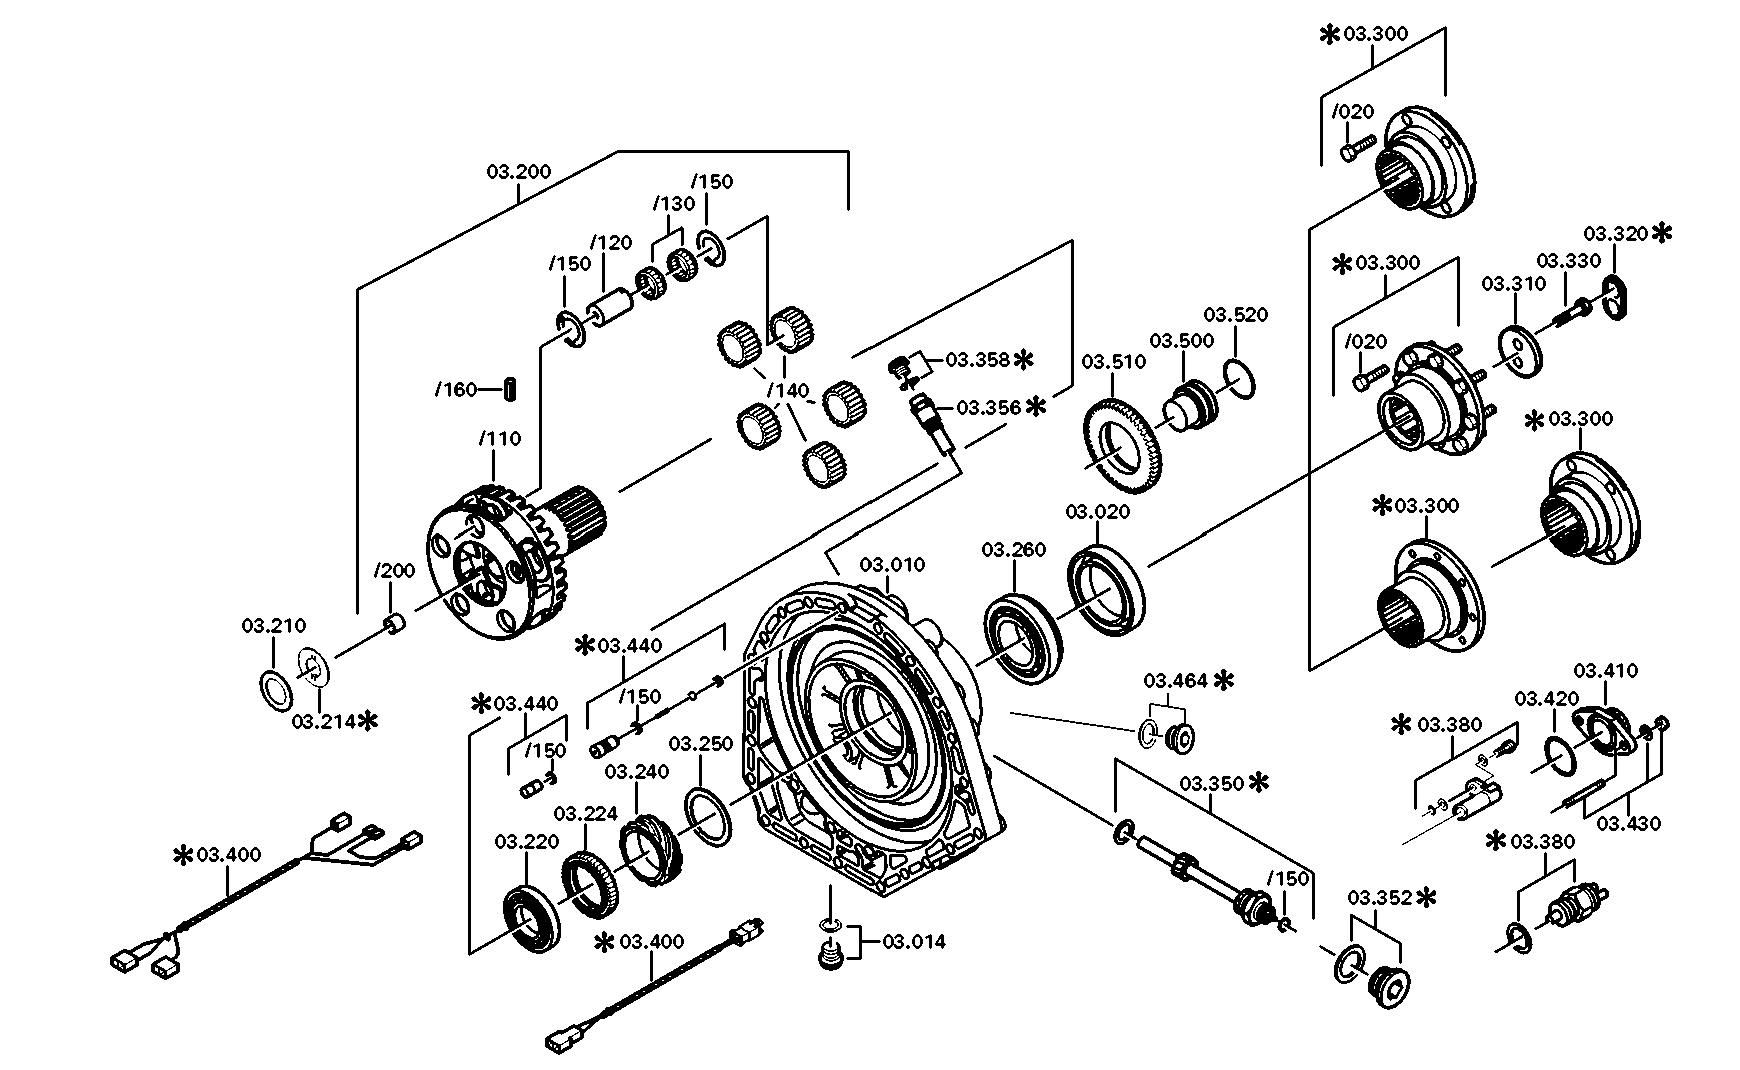 drawing for MOXY TRUCKS AS 252624 - SPRING WASHER (figure 1)